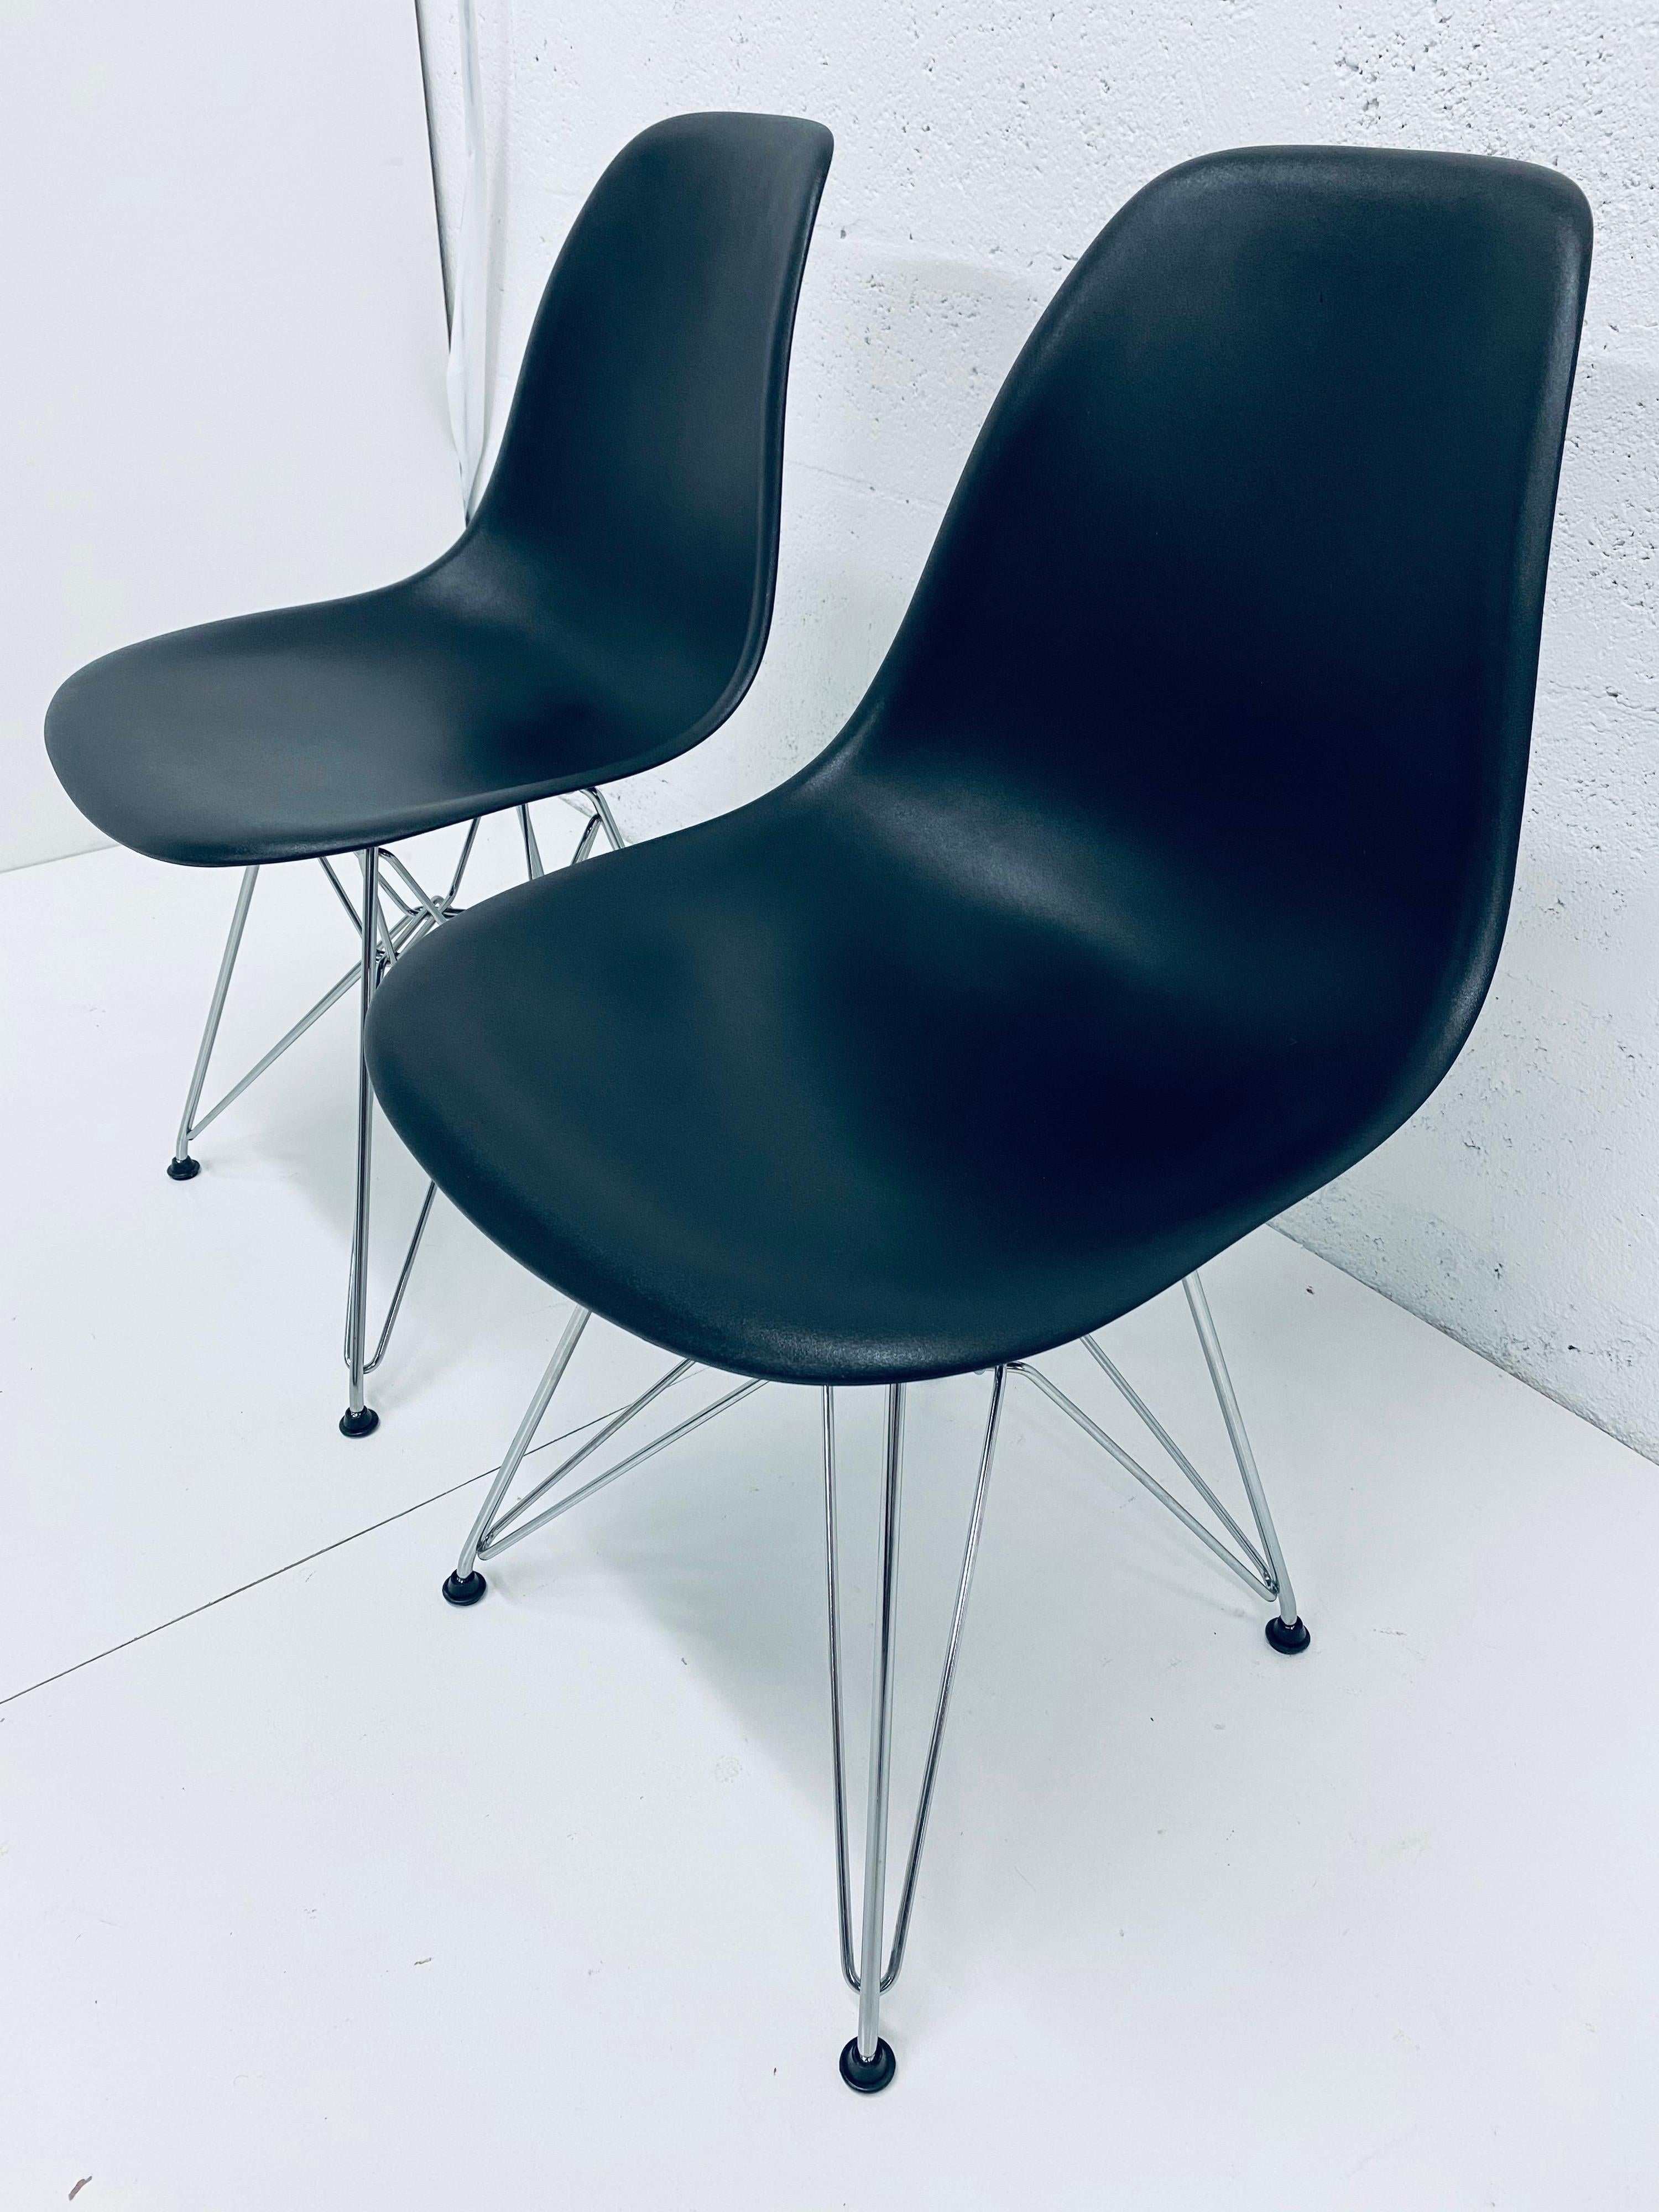 Two black moulded plastic side chairs with chrome Eiffel Tower bases by Charles and Ray Eames for Herman Miller, 2010s.

Charles and Ray Eames realized their dream to create a single-shell form over 80 years ago by making their molded chairs of